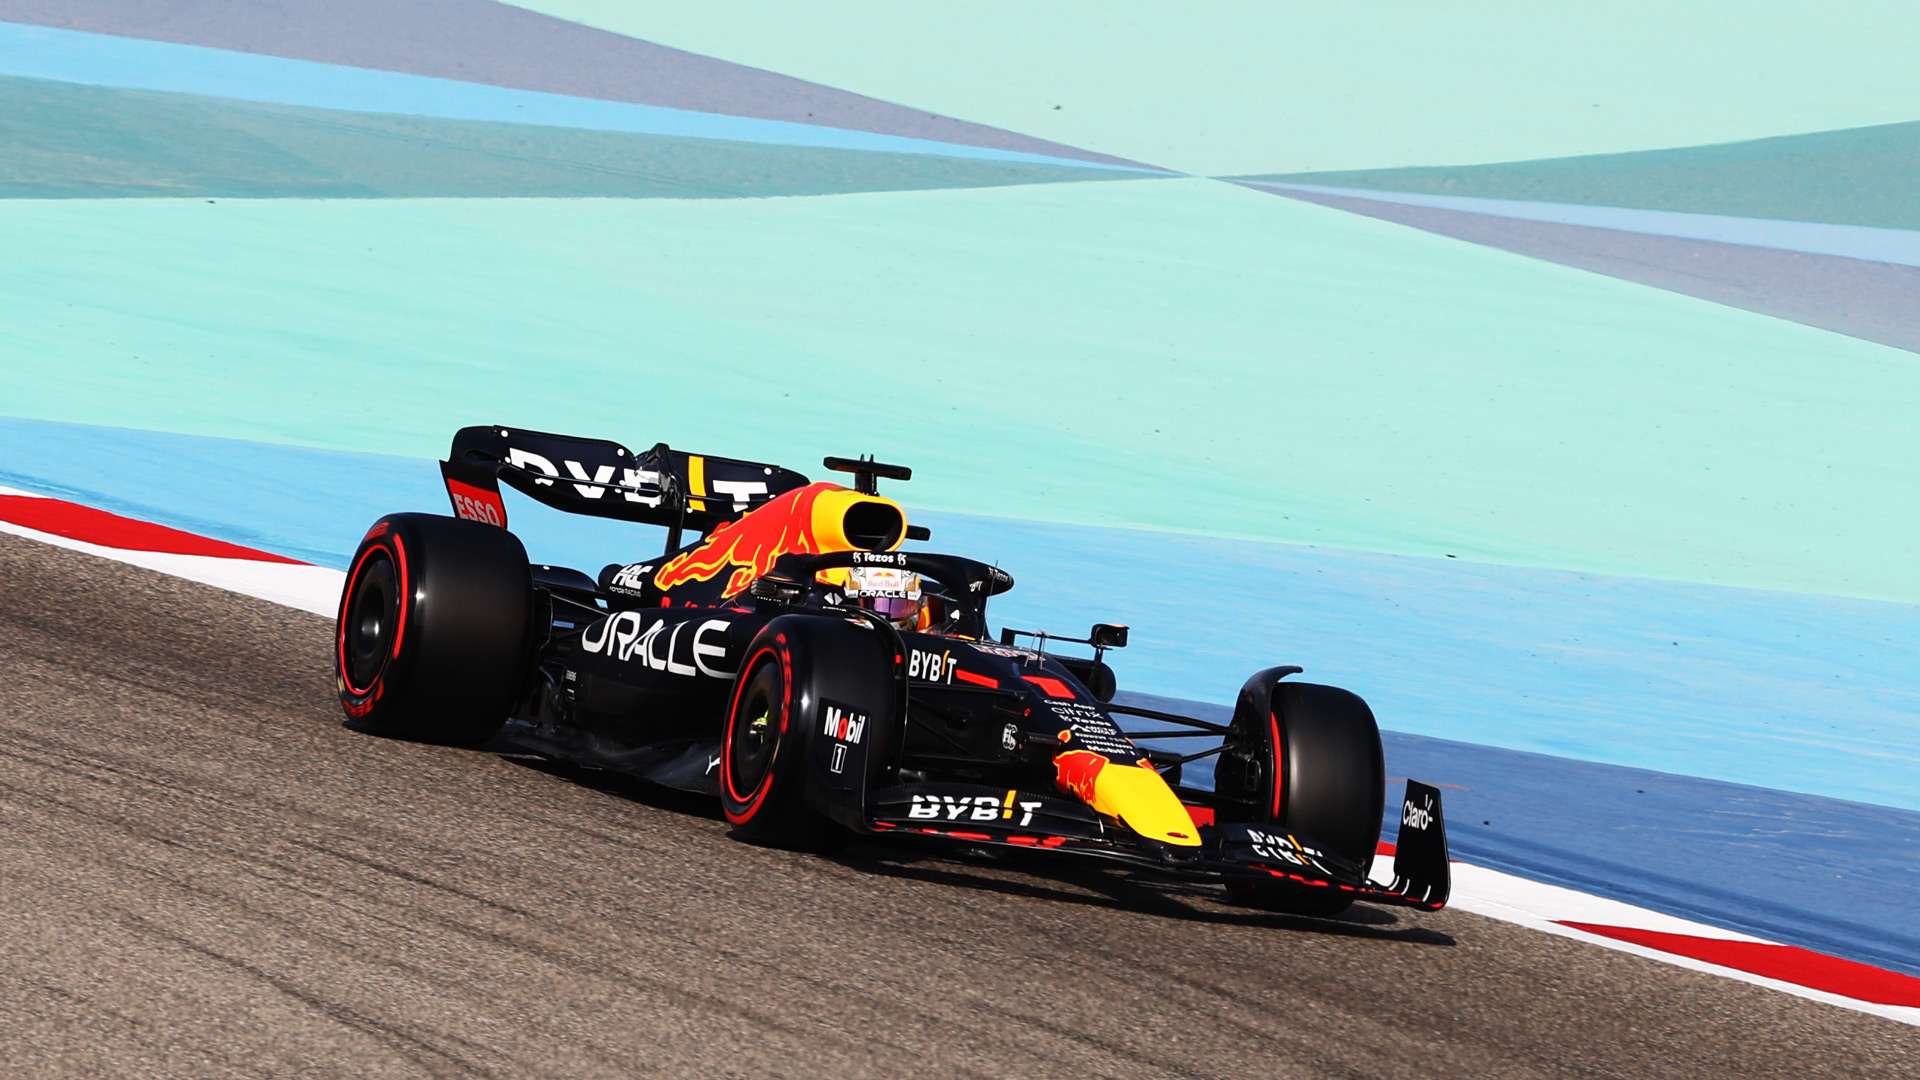 2022 Bahrain Grand Prix FP3 report and highlights: Max Verstappen sets ominous pace in final practice session in Bahrain. Formula 1®